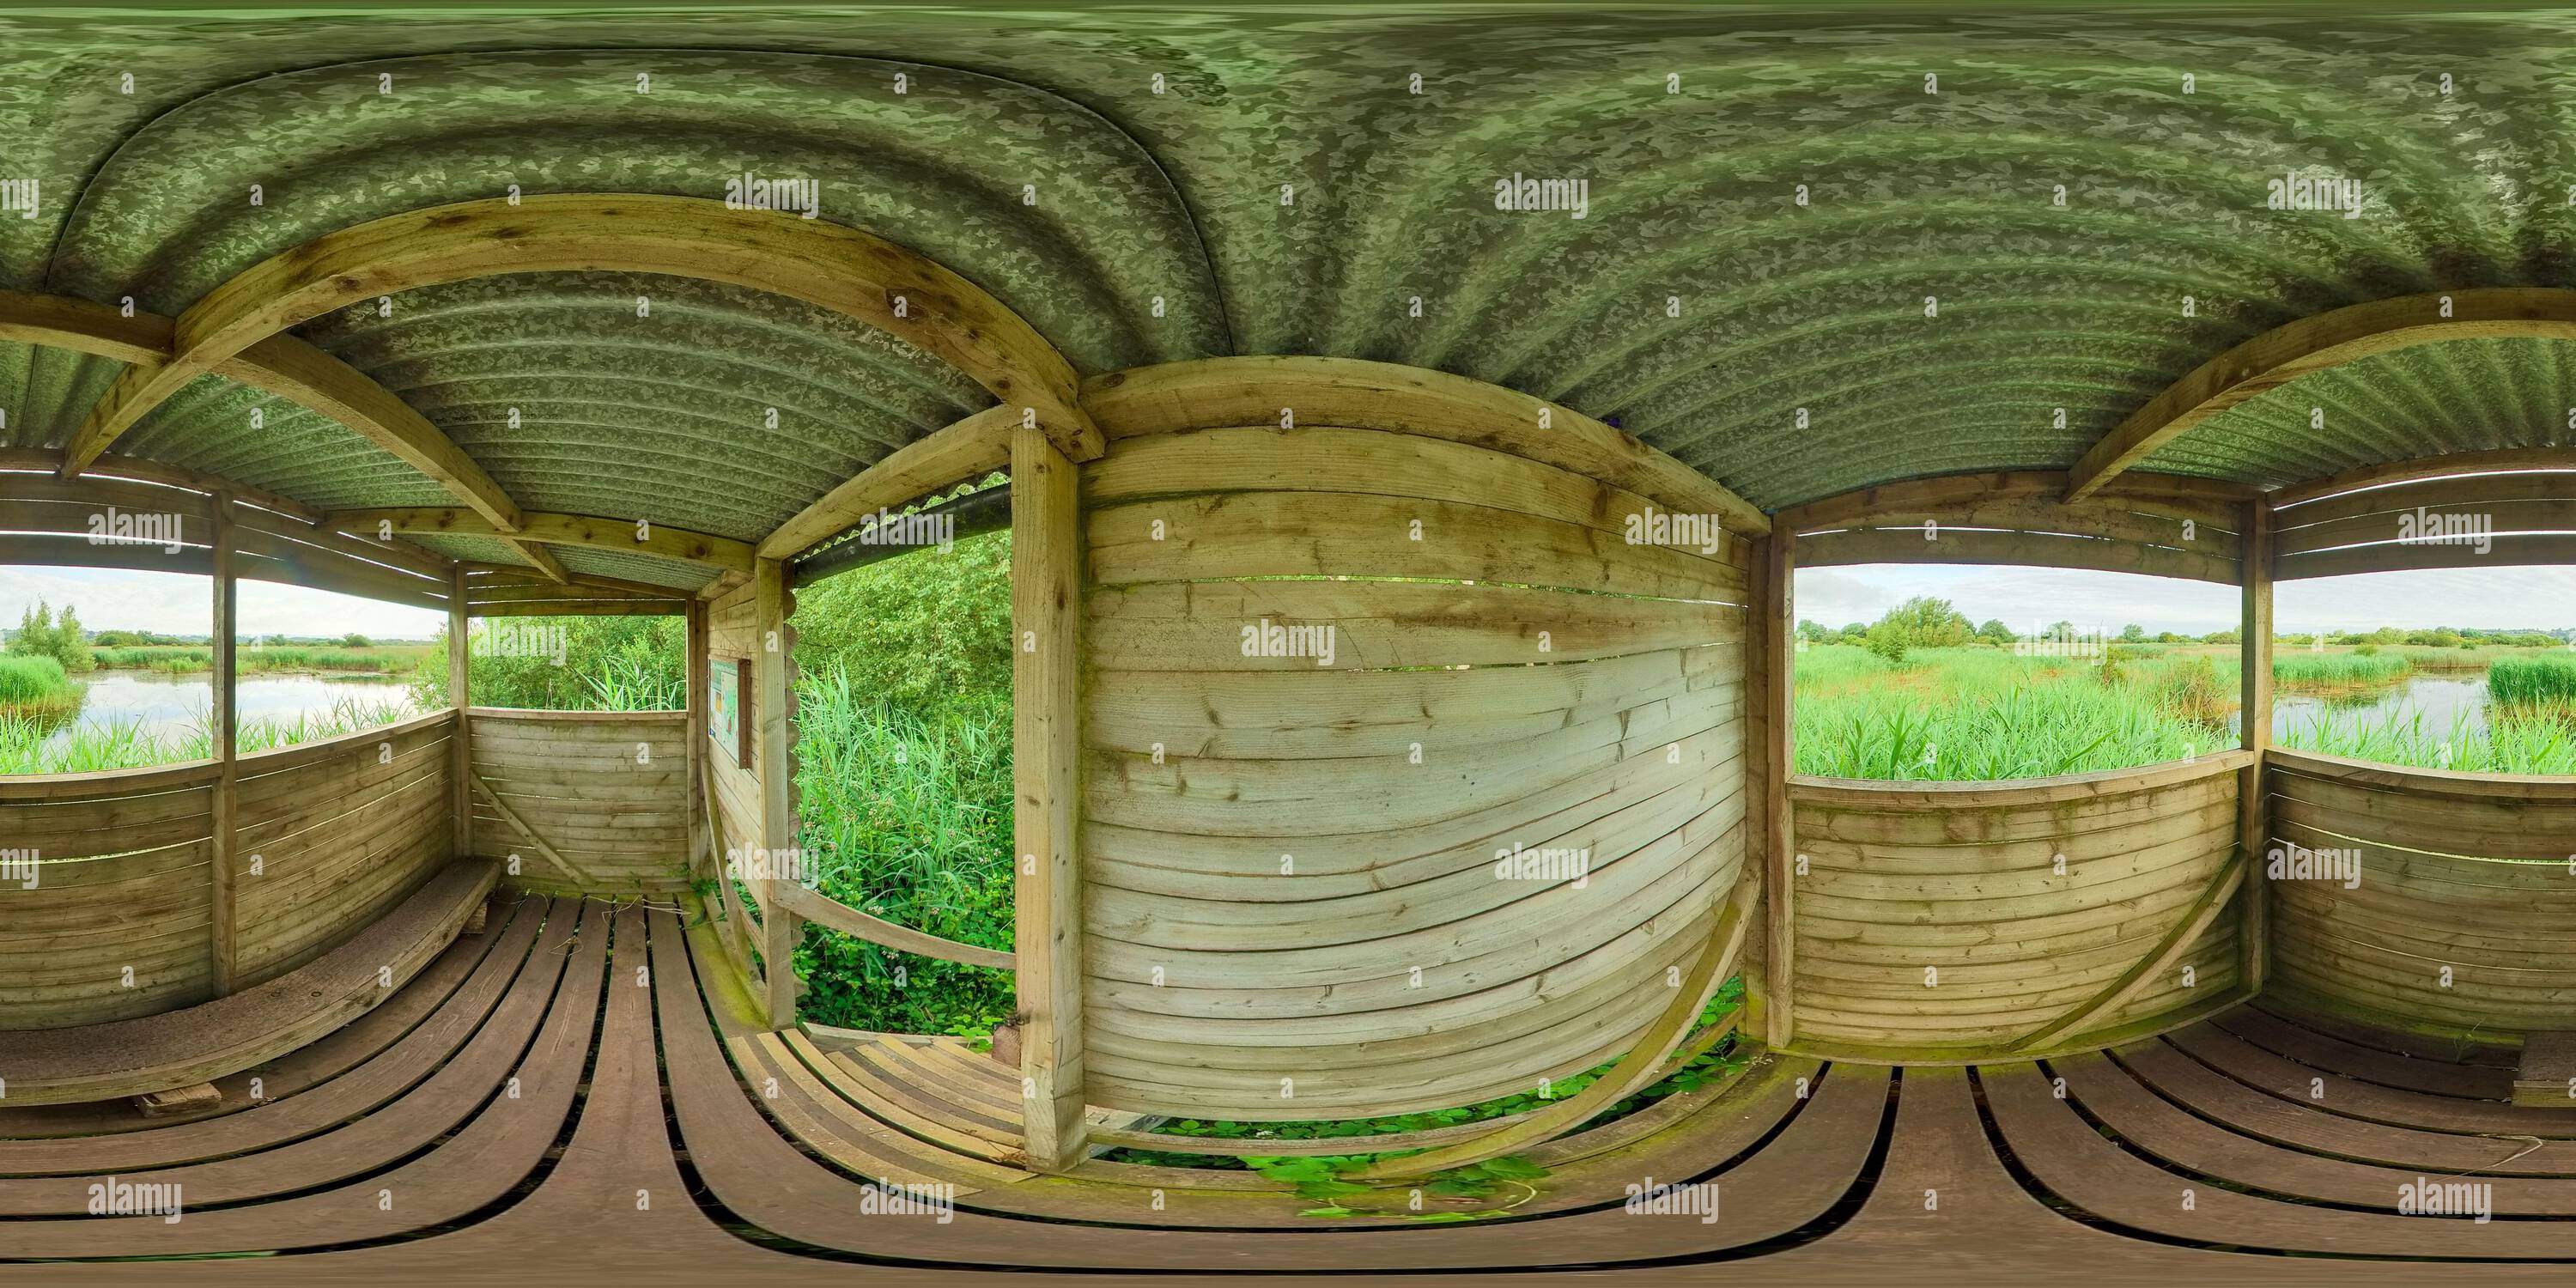 360 degree panoramic view of 30 Acre Hide Interior Left Side at Westhay Moor National Nature Reserve